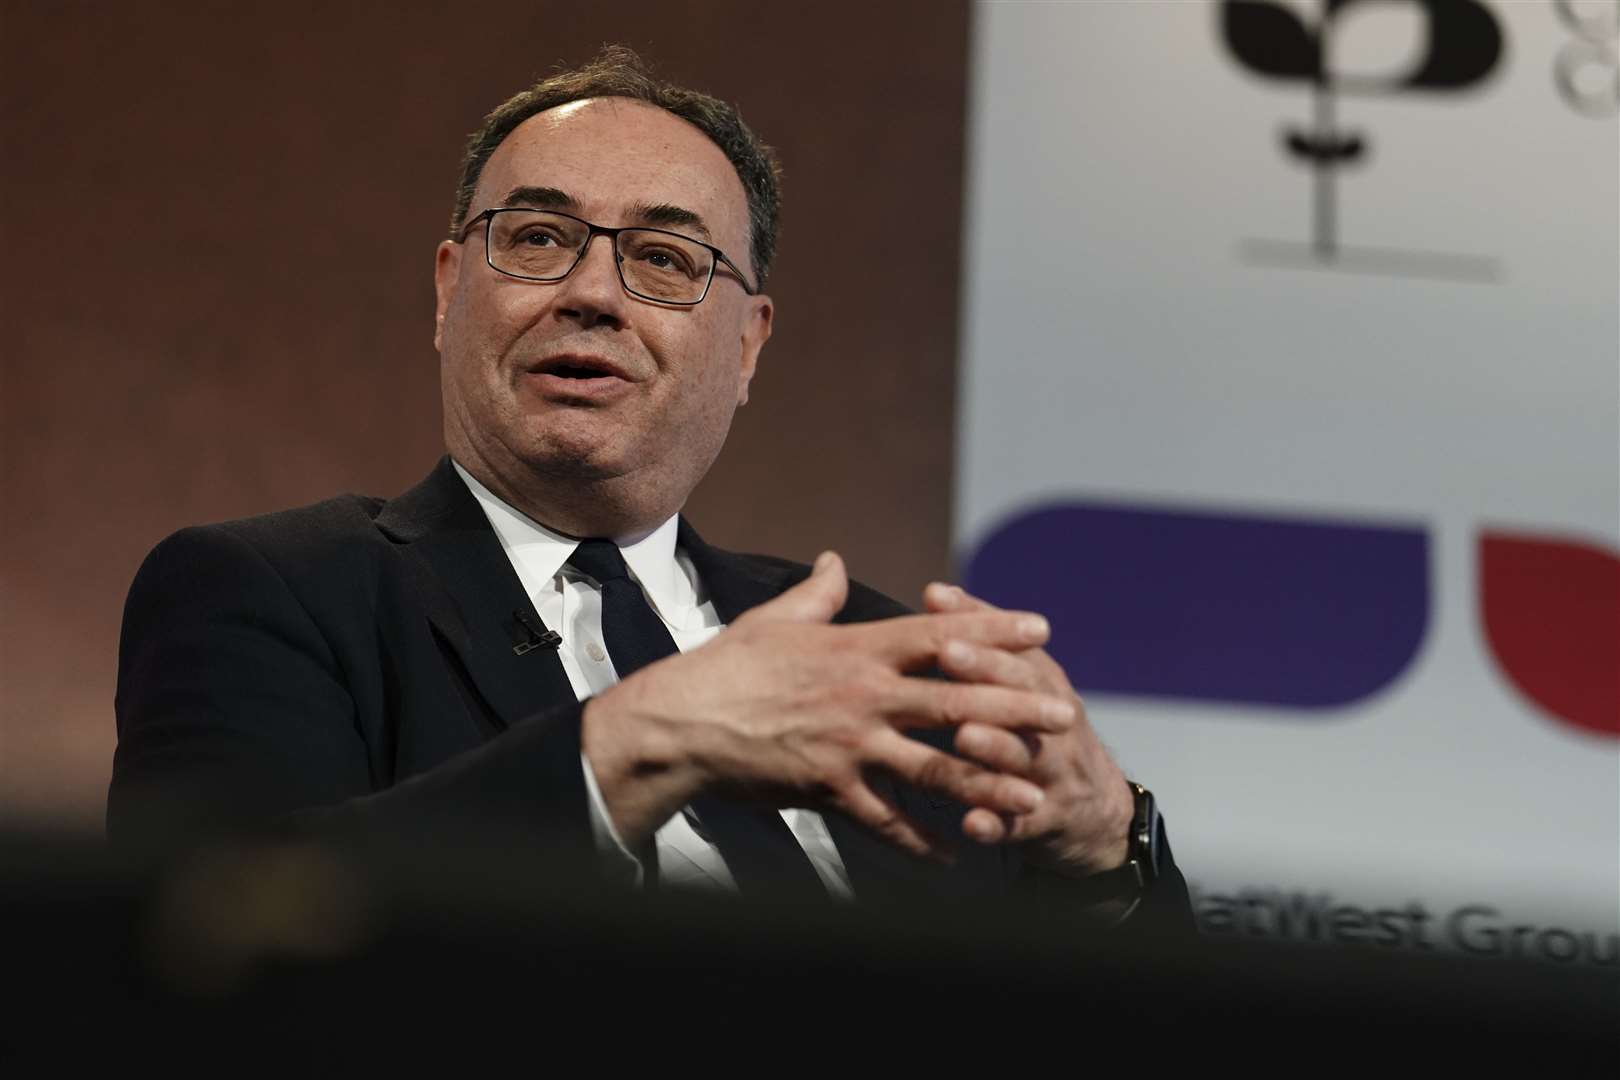 Bank of England governor Andrew Bailey started his term in 2020 (Jordan Pettitt/PA)